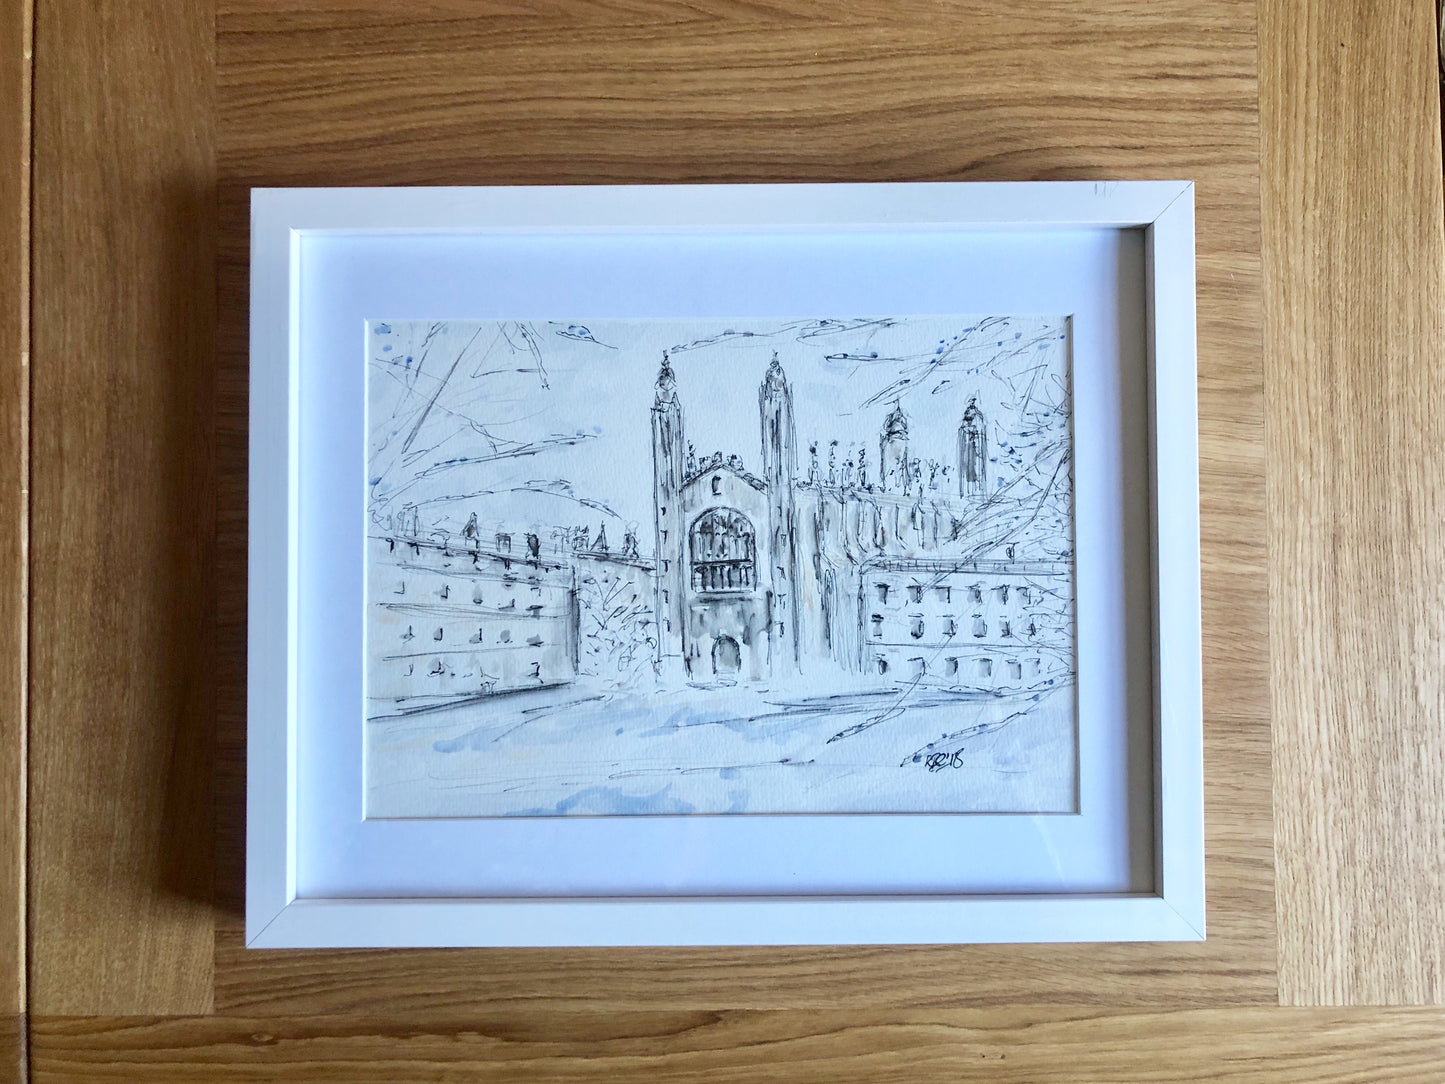 Kings College in the snow - SOLD